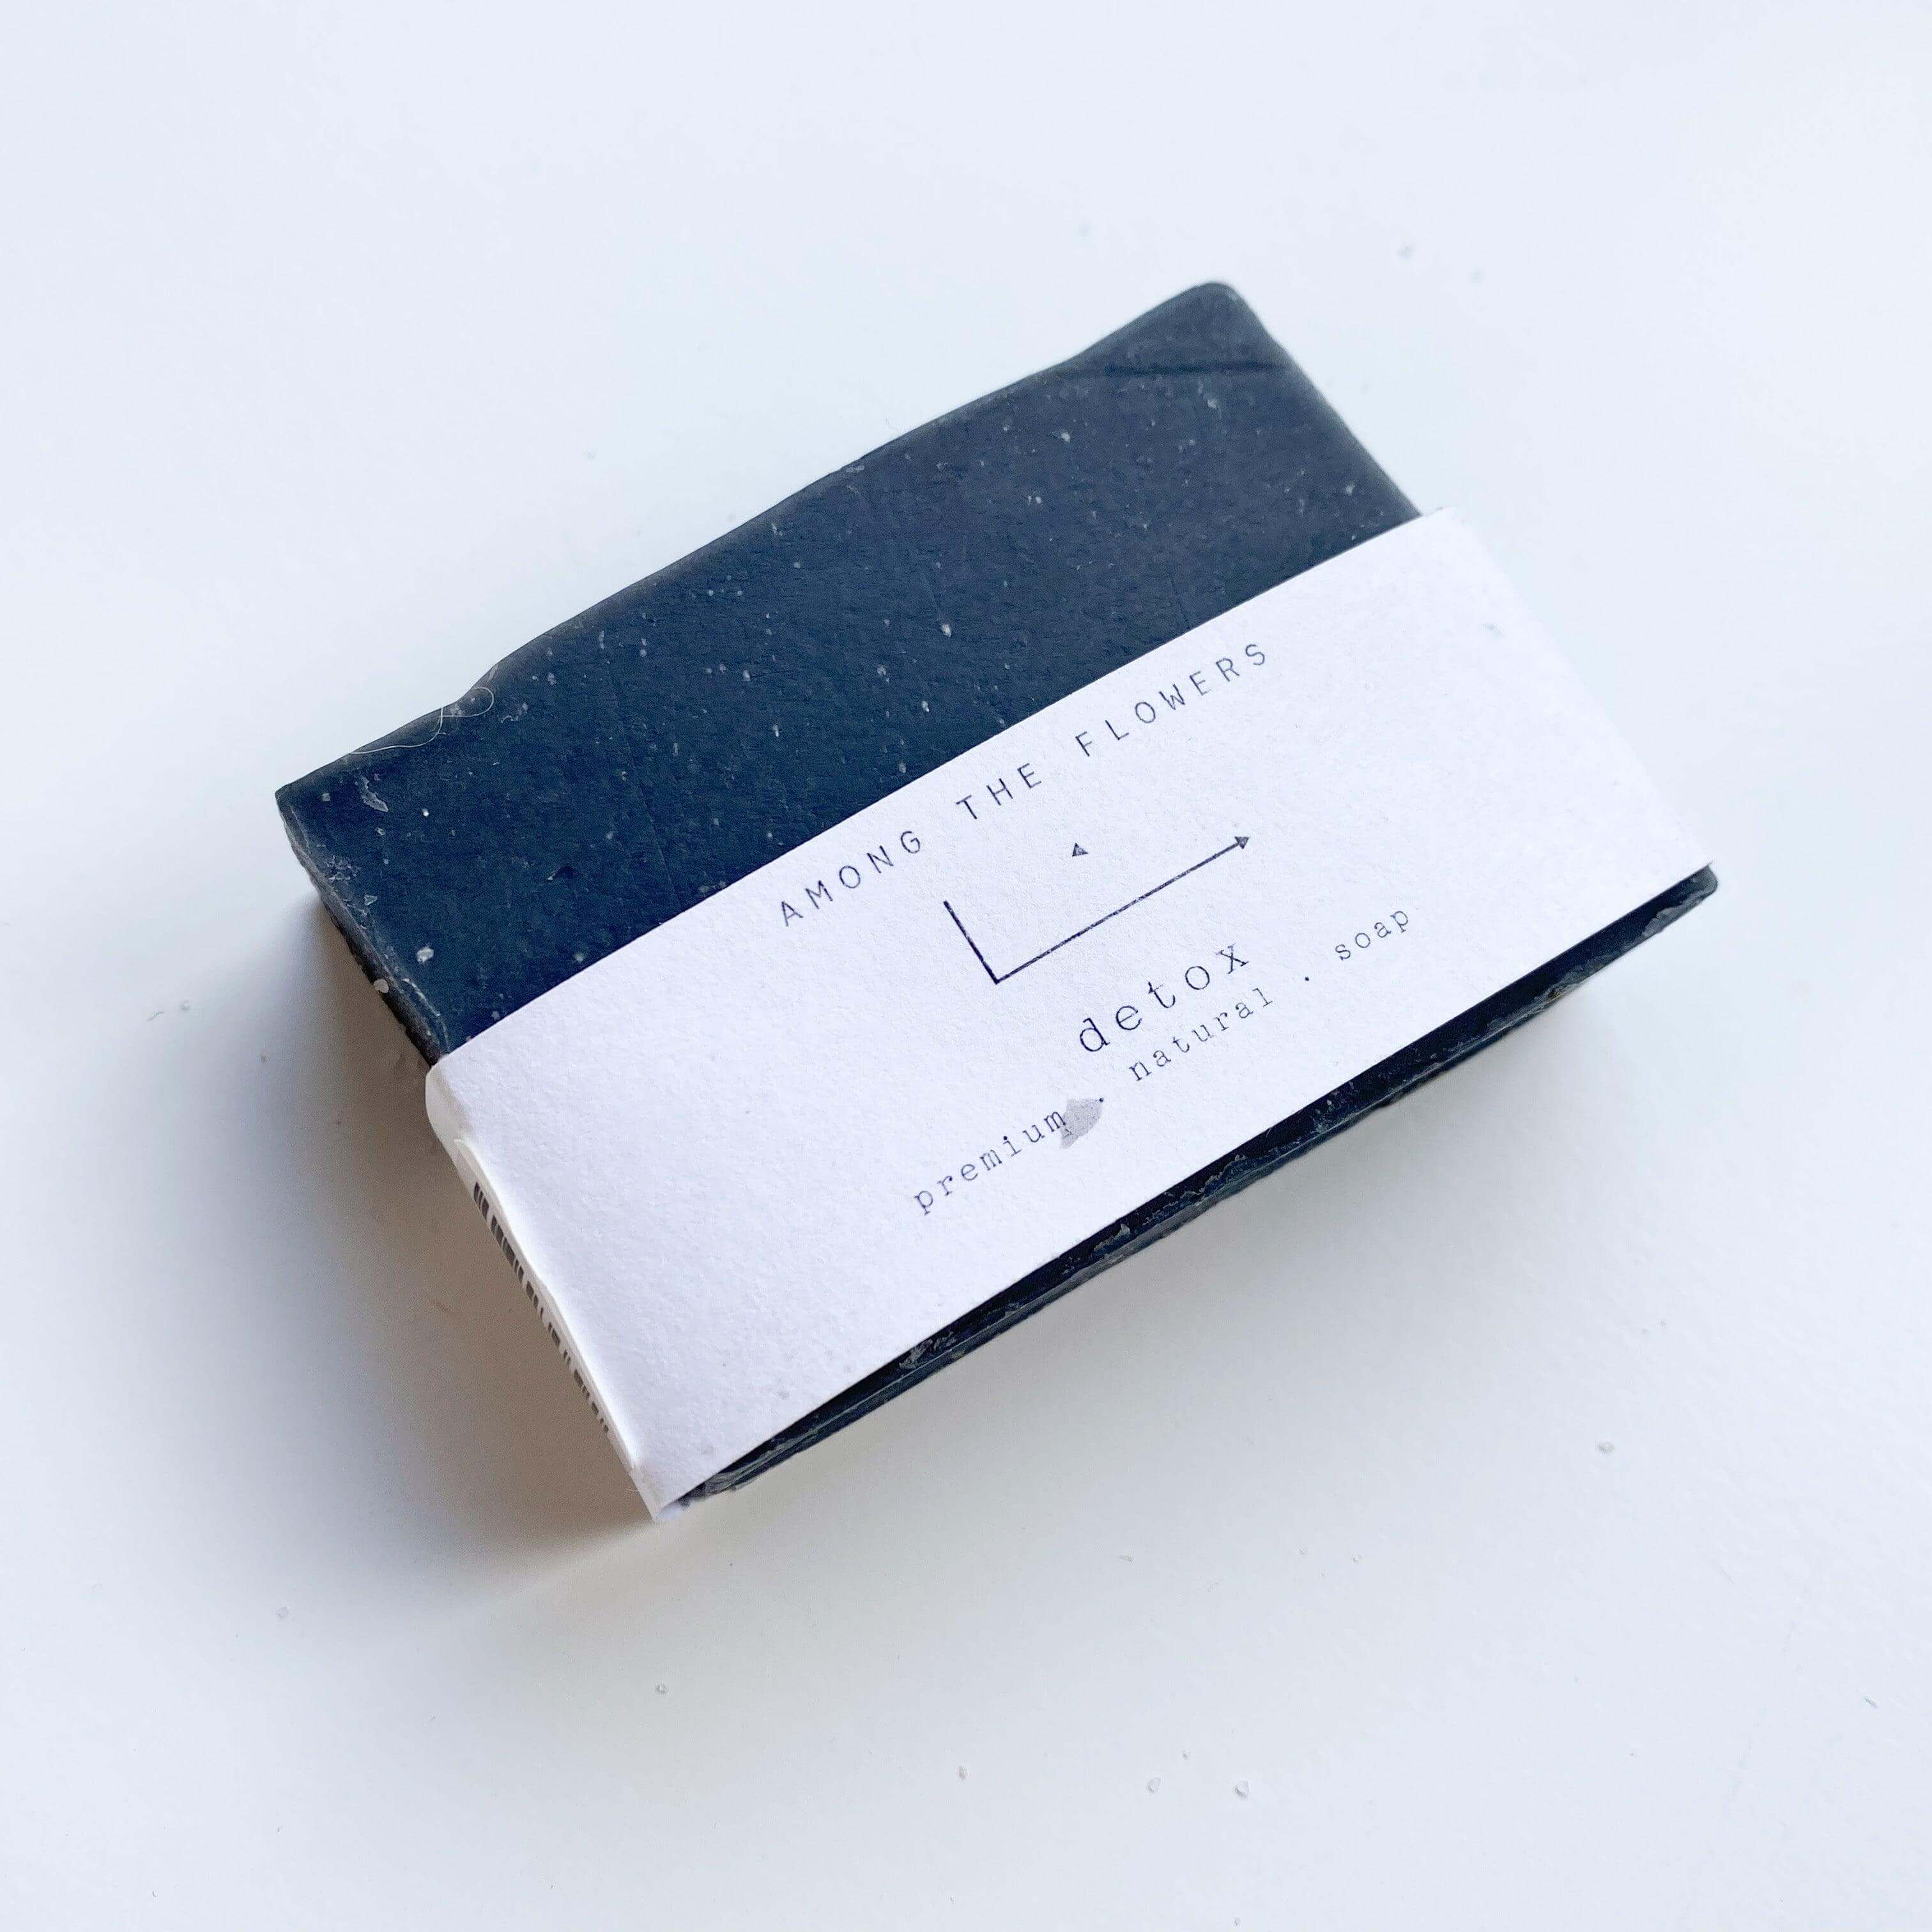 Cold Processed Soap - Sprig Flower Co